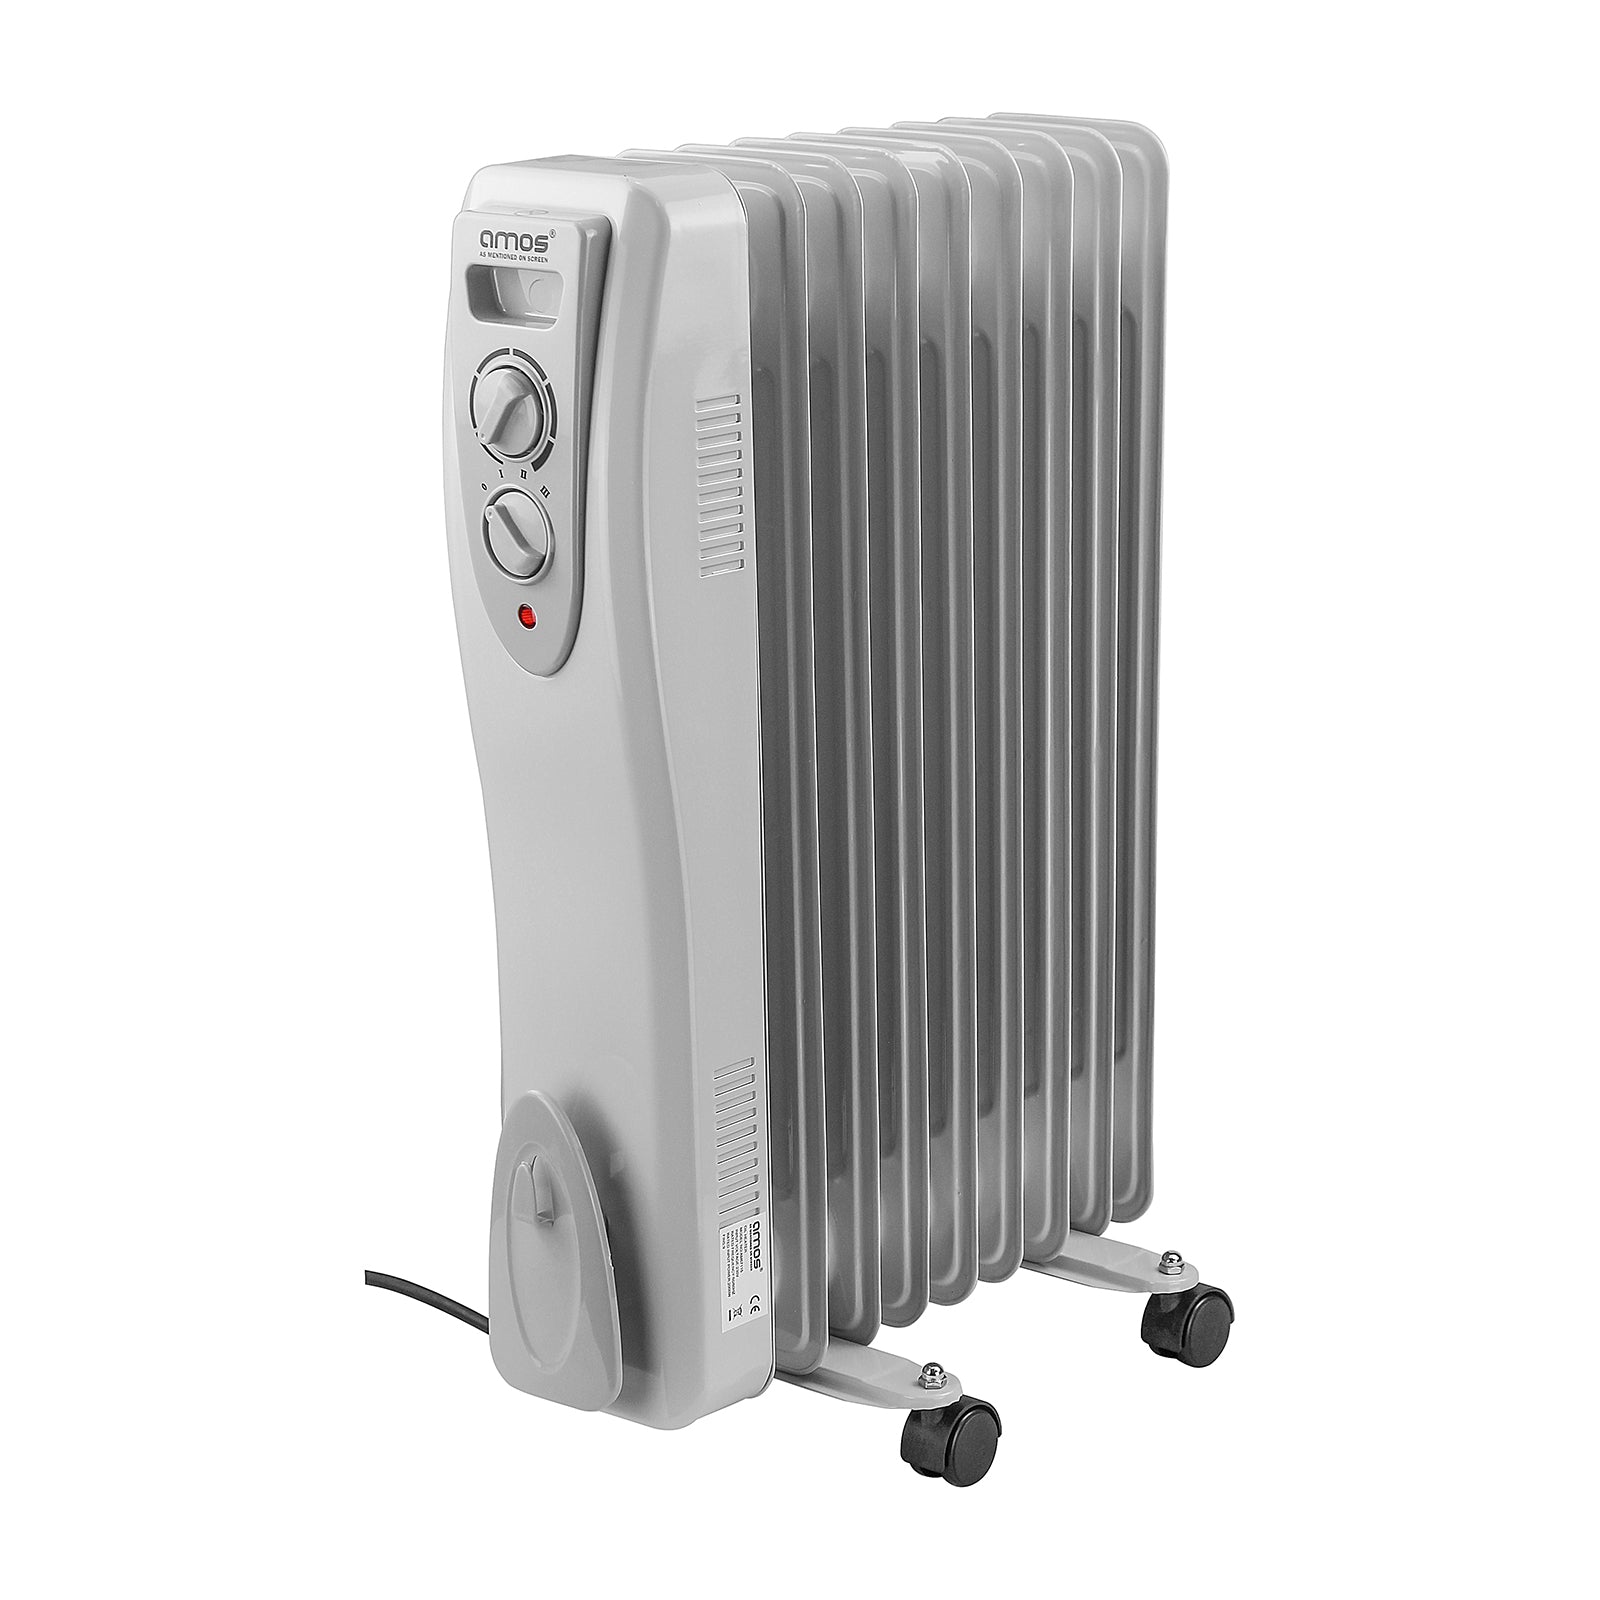 AMOS 9 Fin 2000W Oil Filled Radiator 3 Setting Thermostat Home Office Heater